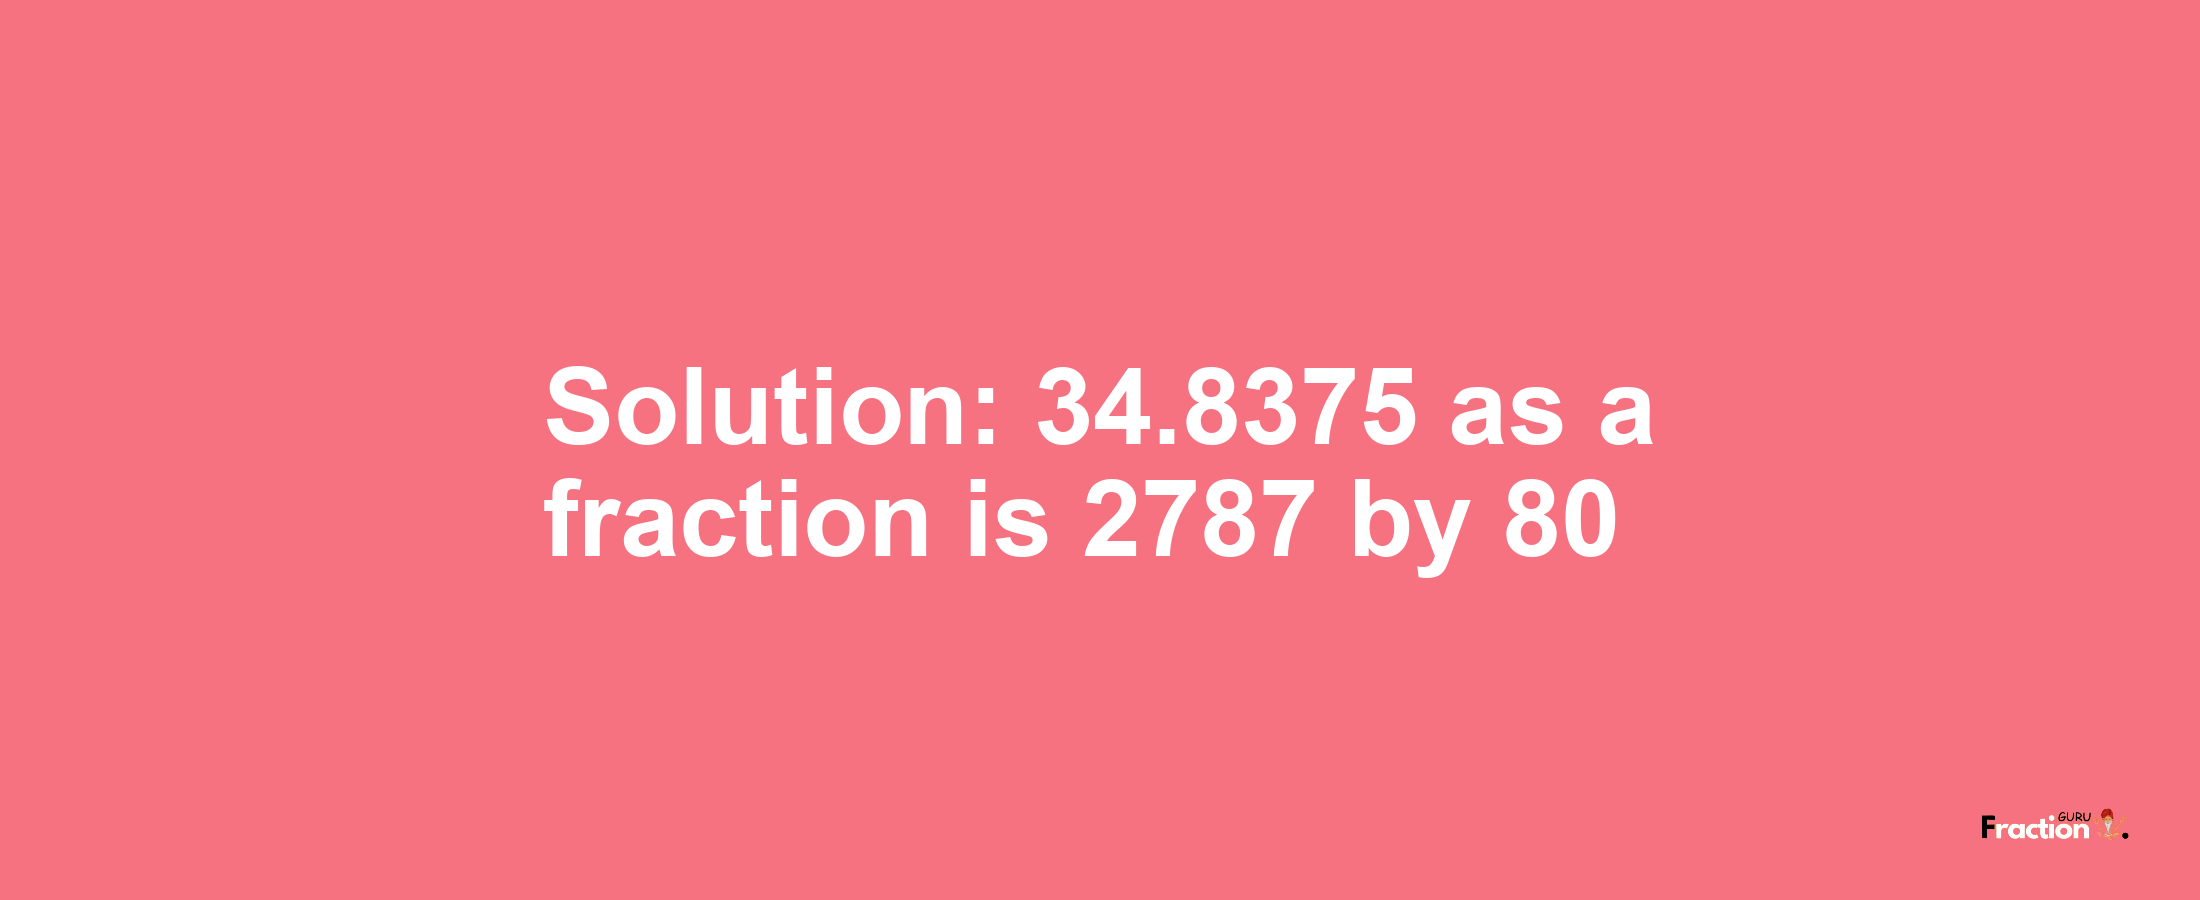 Solution:34.8375 as a fraction is 2787/80